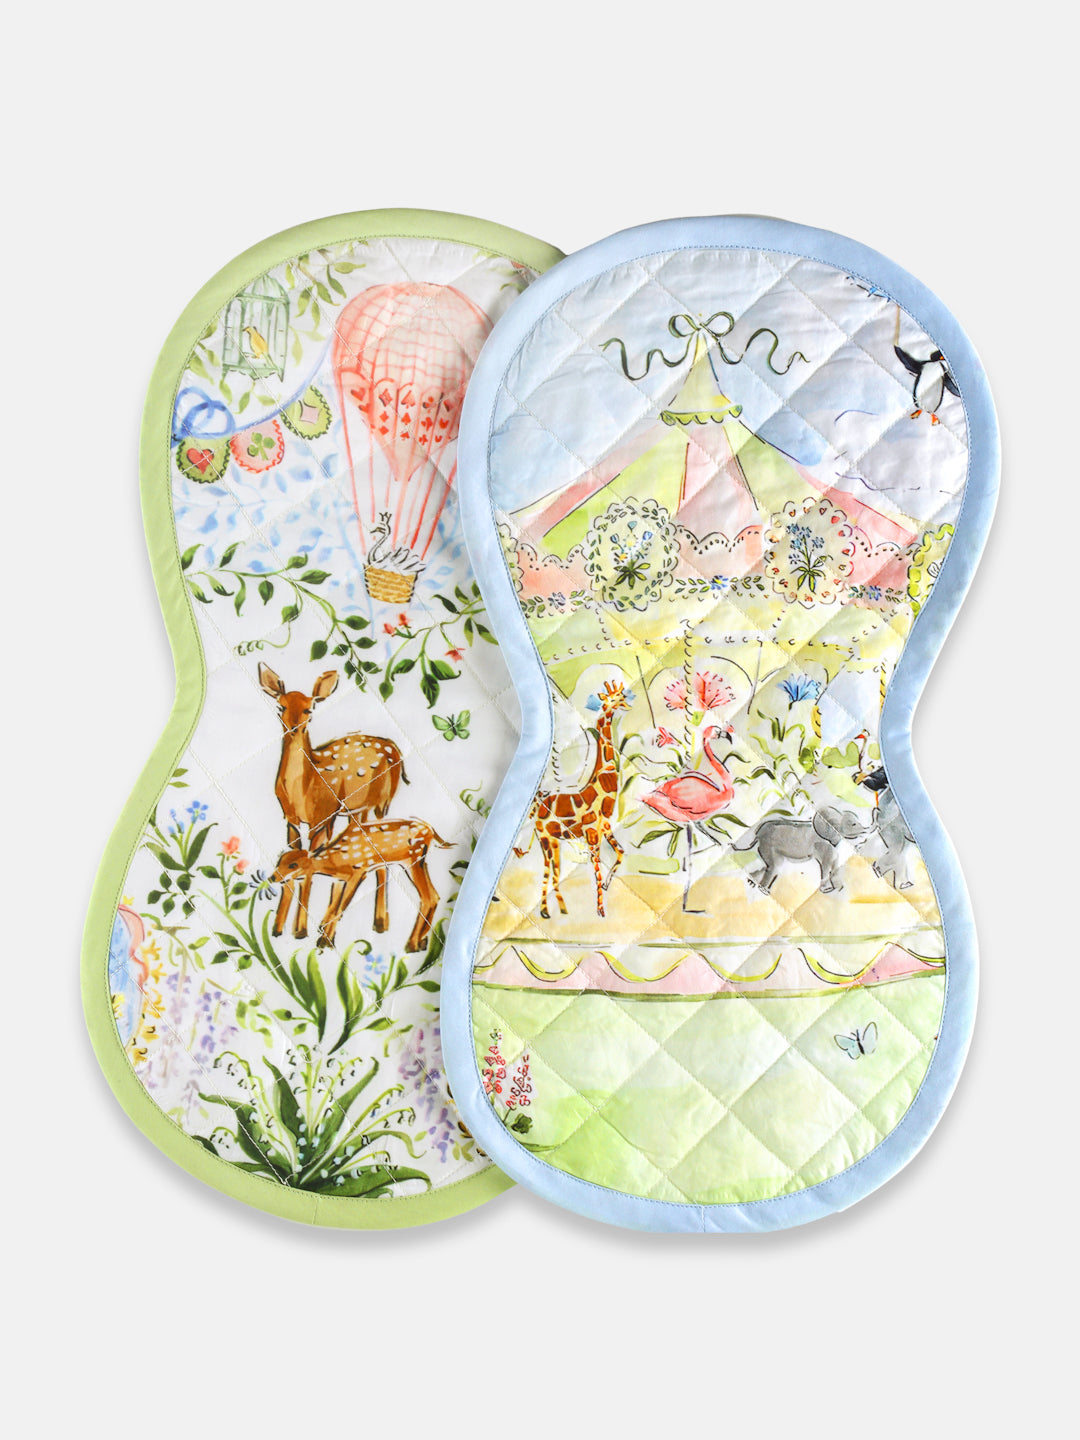 Buy BURP Cloth Set of 2 for baby online